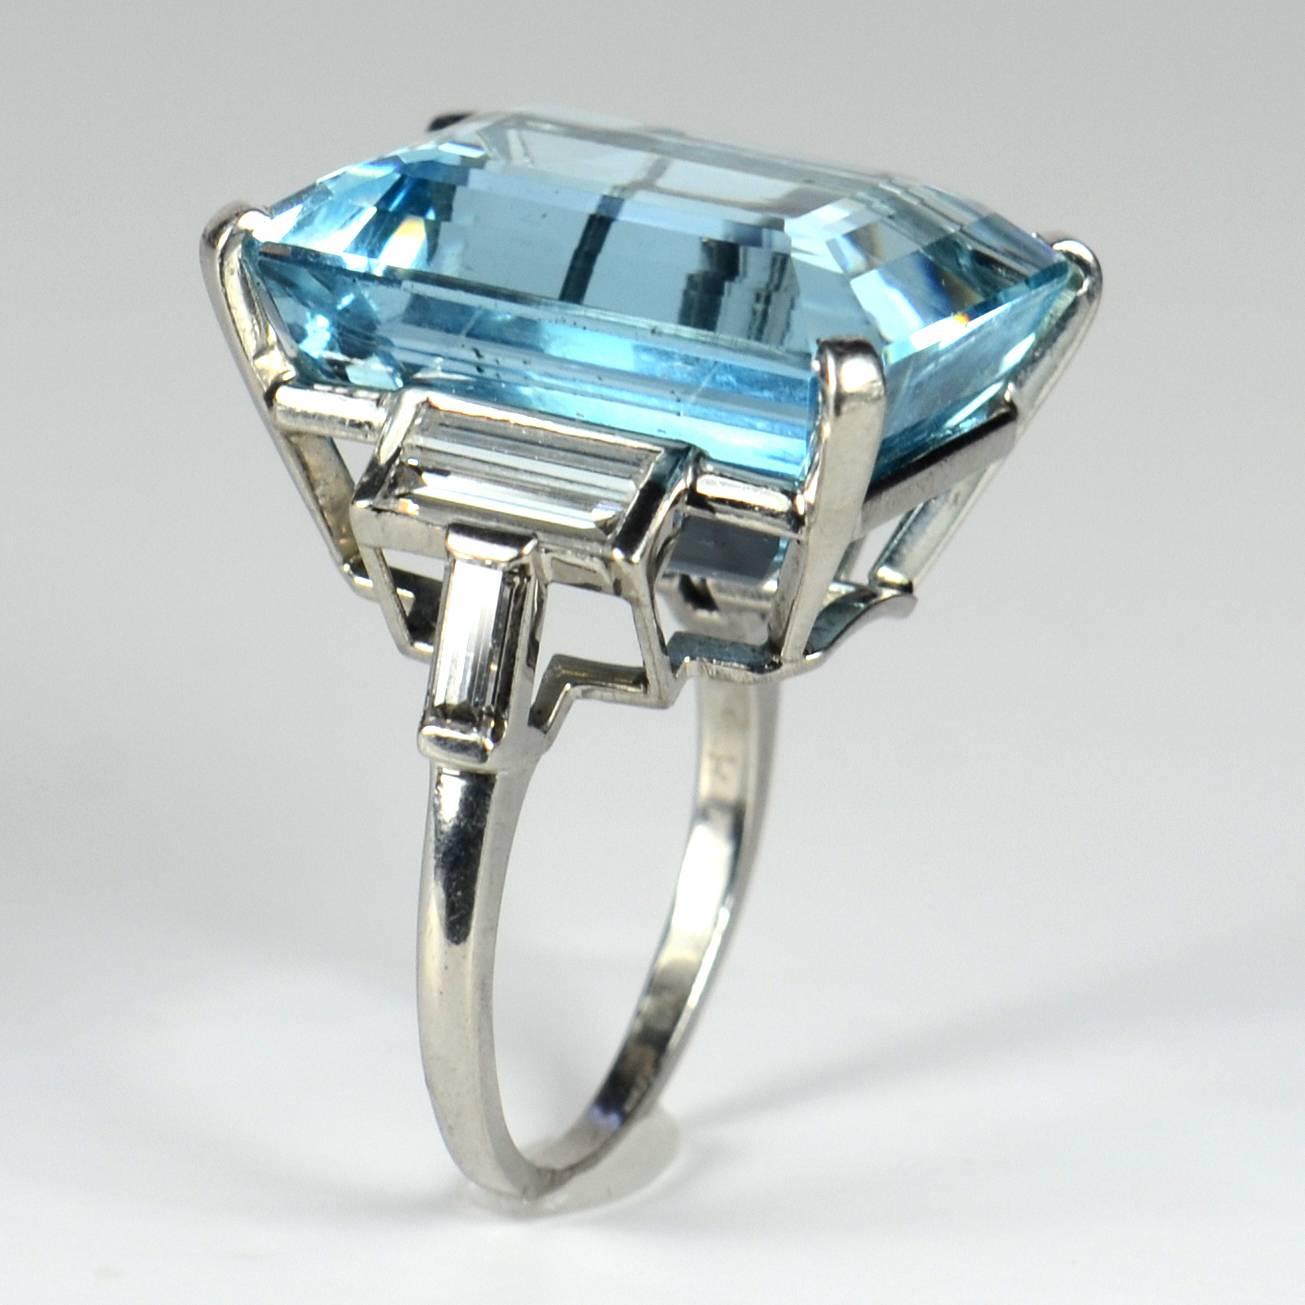 A fine aquamarine, diamond and platinum cocktail ring by Trabert & Hoeffer Mauboussin from the Retro period set with a rectangular step-cut aquamarine.  The geometric shoulders are each set with three elegant baguette-cut diamonds.  The